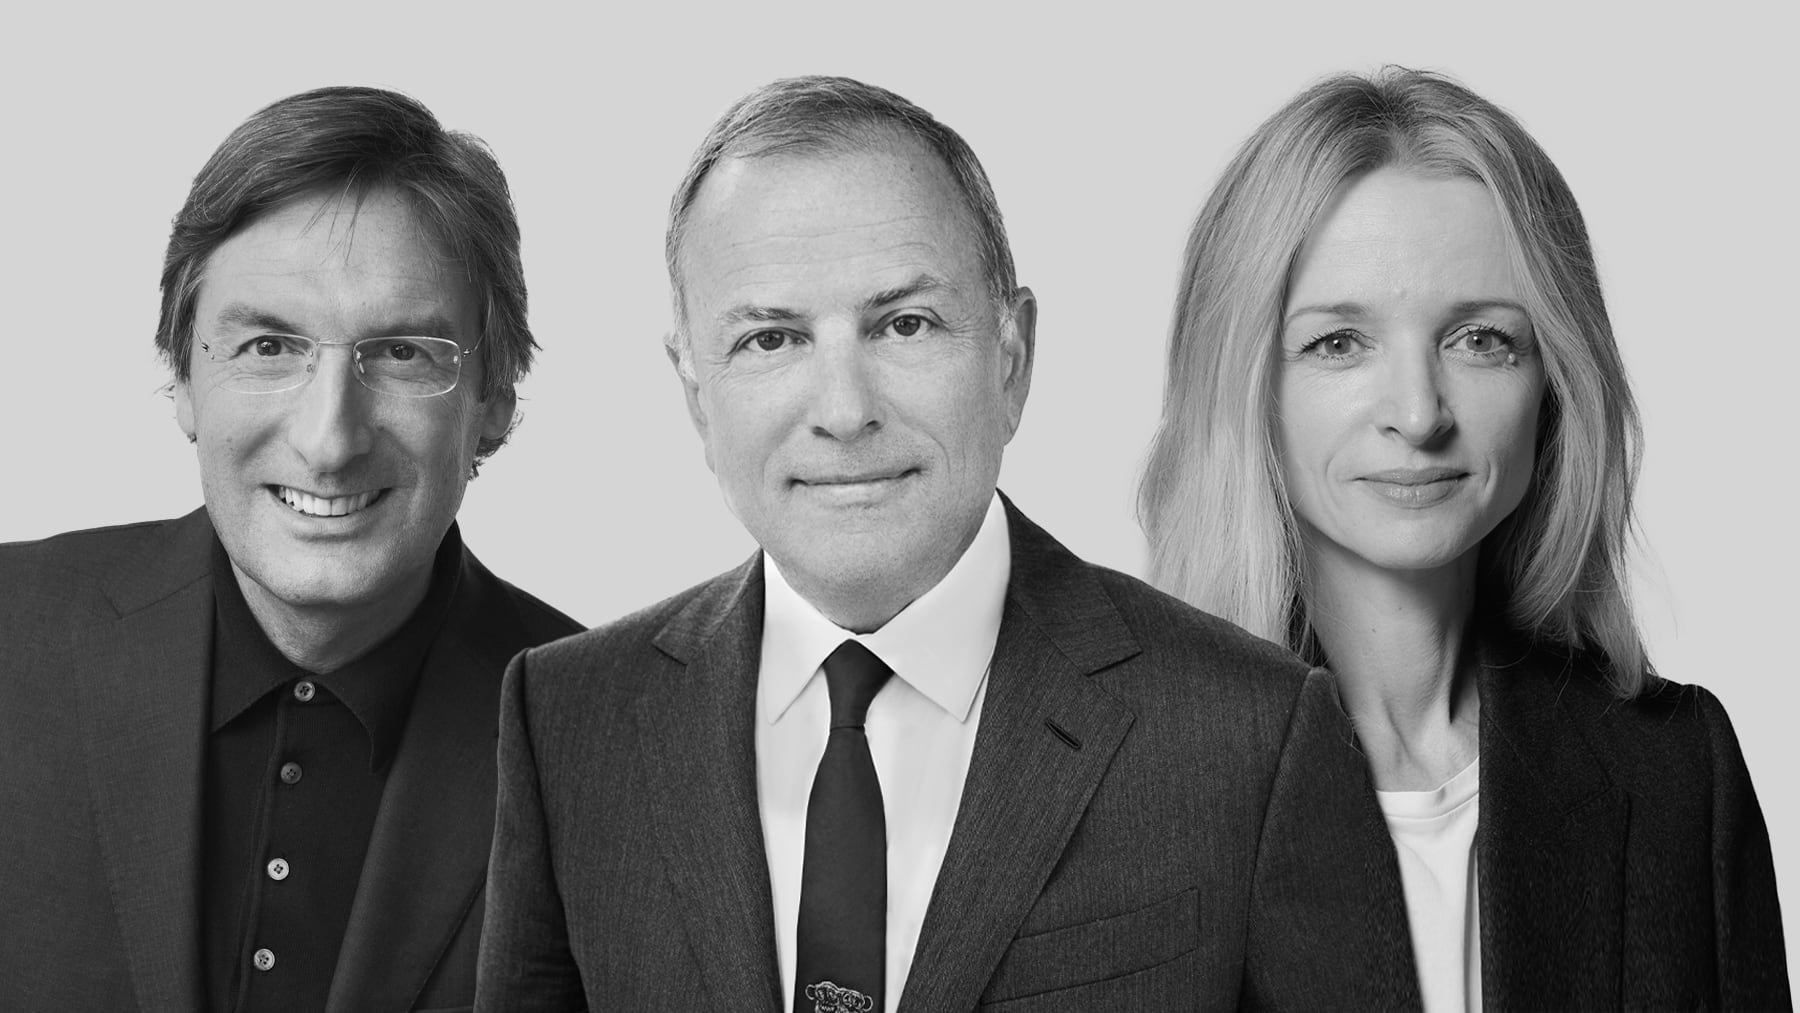 Pietro Beccari will succeed Michael Burke leading LVMH flagship Louis Vuitton, while Delphine Arnault will become Dior’s new CEO as part of the luxury conglomerate’s biggest executive reshuffle in years.